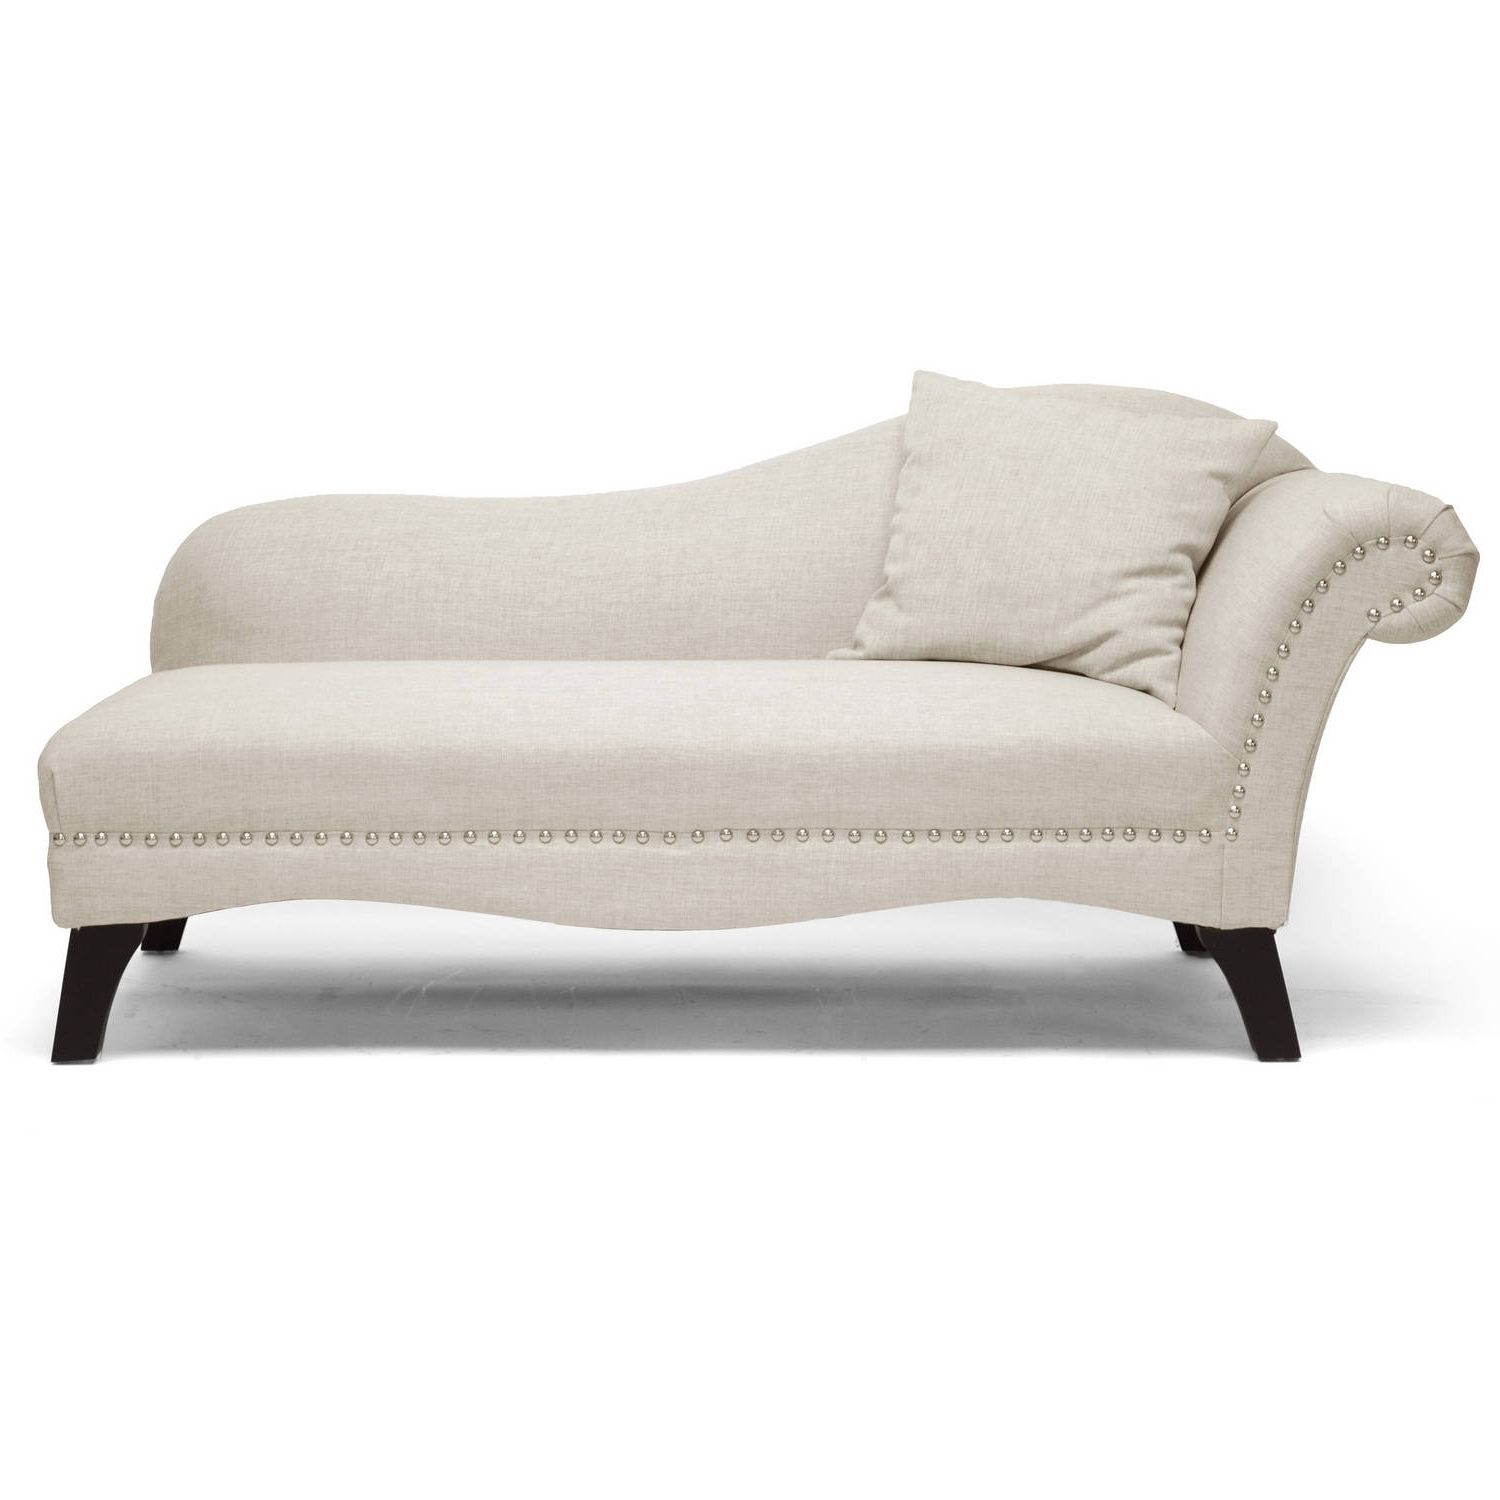 Recent Chaise Lounges – Walmart Intended For Tufted Chaise Lounge Chairs (View 14 of 15)